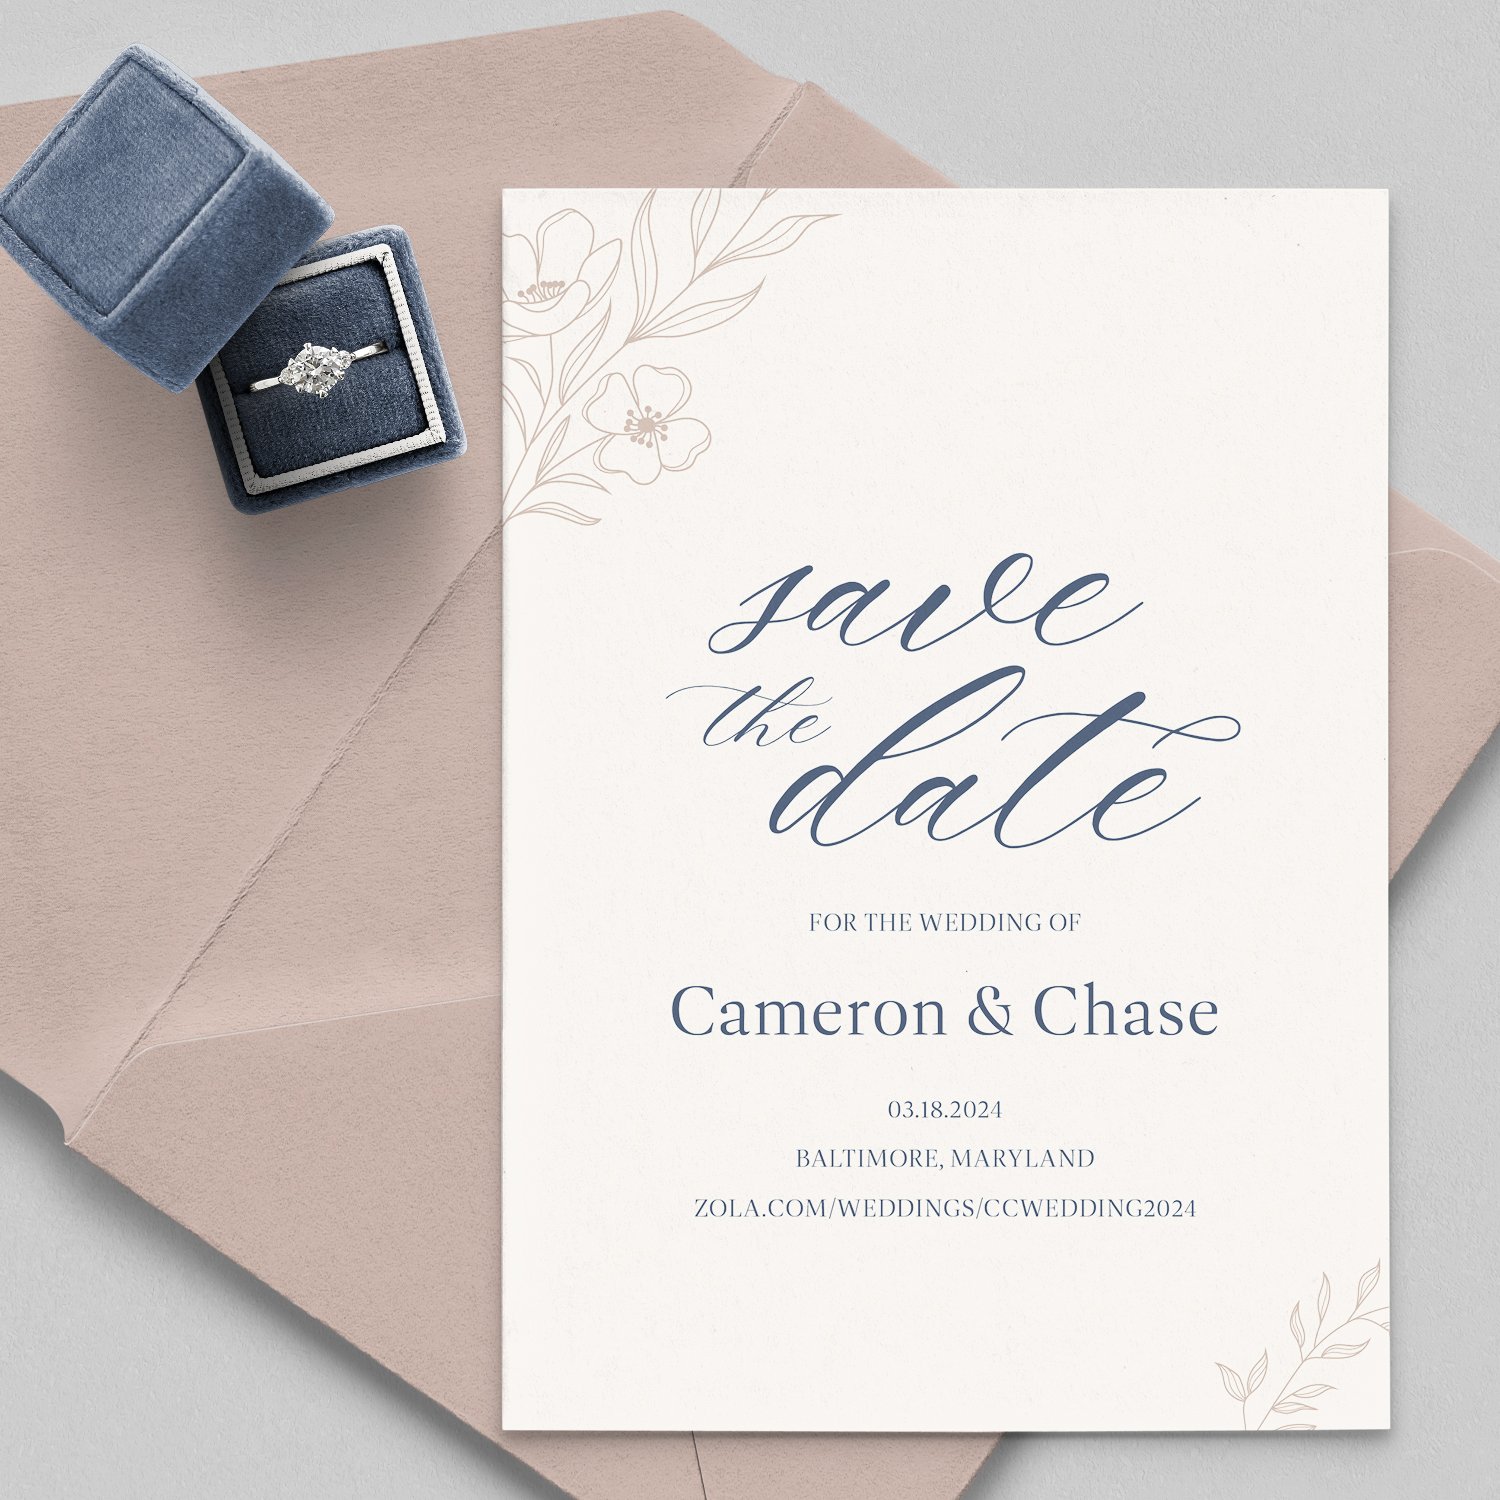 25 Wedding Save the Date Cards Personalised with Envelopes & FREE P&P